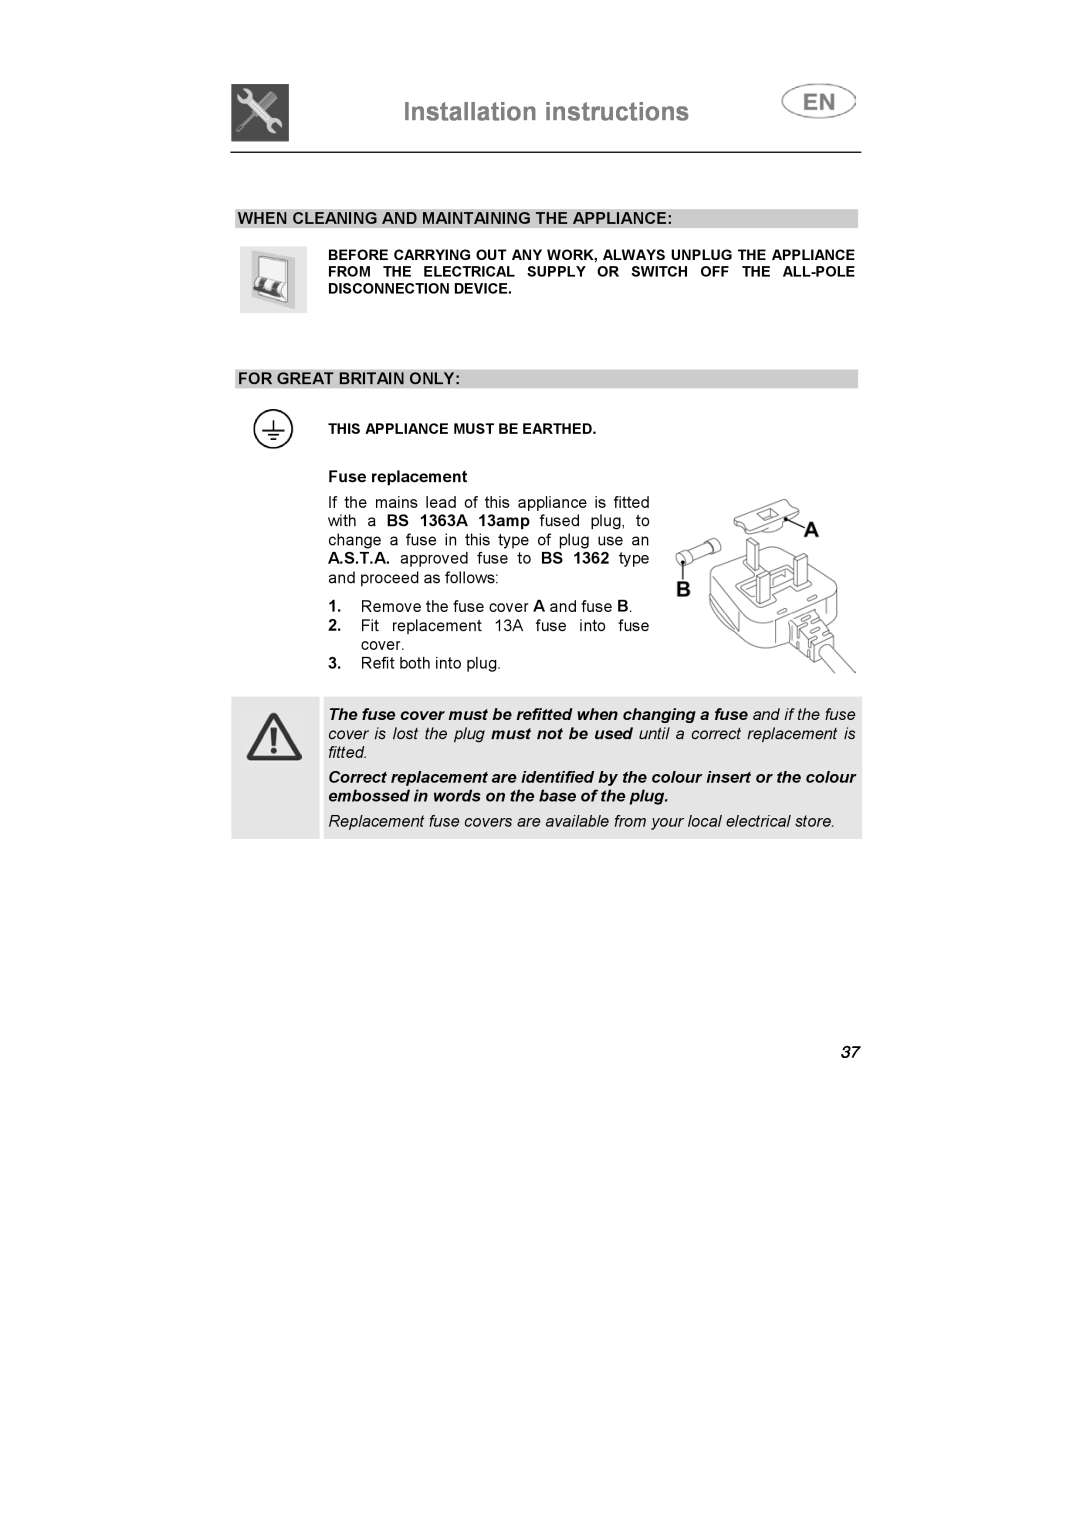 Smeg ST1124S-1 Installation instructions, When Cleaning And Maintaining The Appliance, For Great Britain Only 